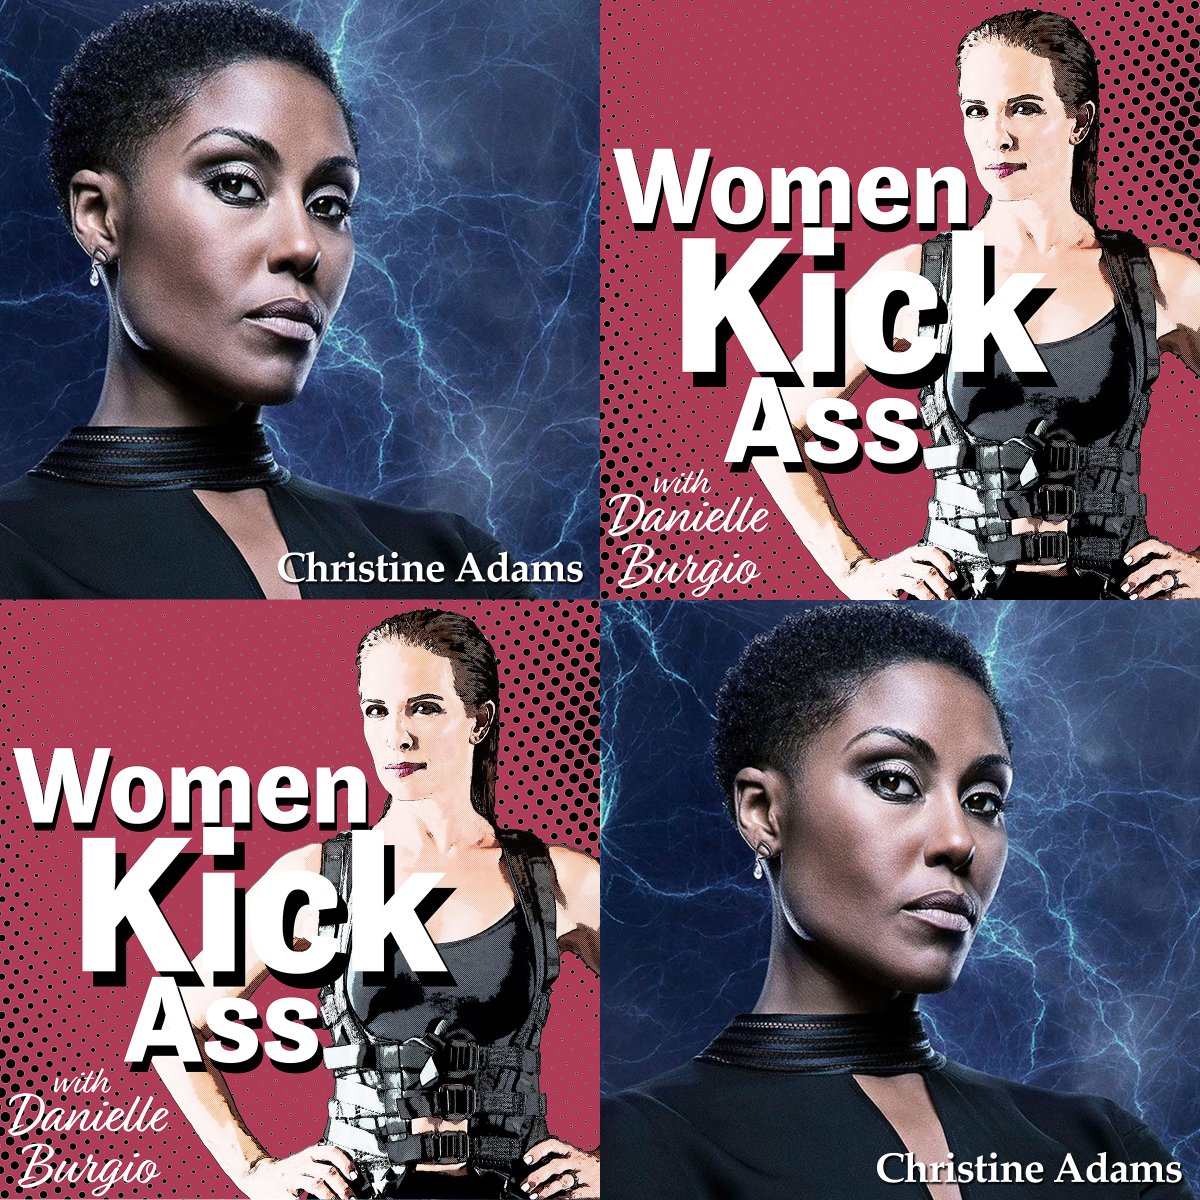 POWERFUL women onscreen!!! The latest ep of #WomenKickAss Podcast @DaniBurgio1111 hosts @ChristineAdams from @blacklightning.  

√ it out:  directory.libsyn.com/episode/index/…

Produced by @JHammondC #ChristineAdams #DanielleBurgio #BlackLightning